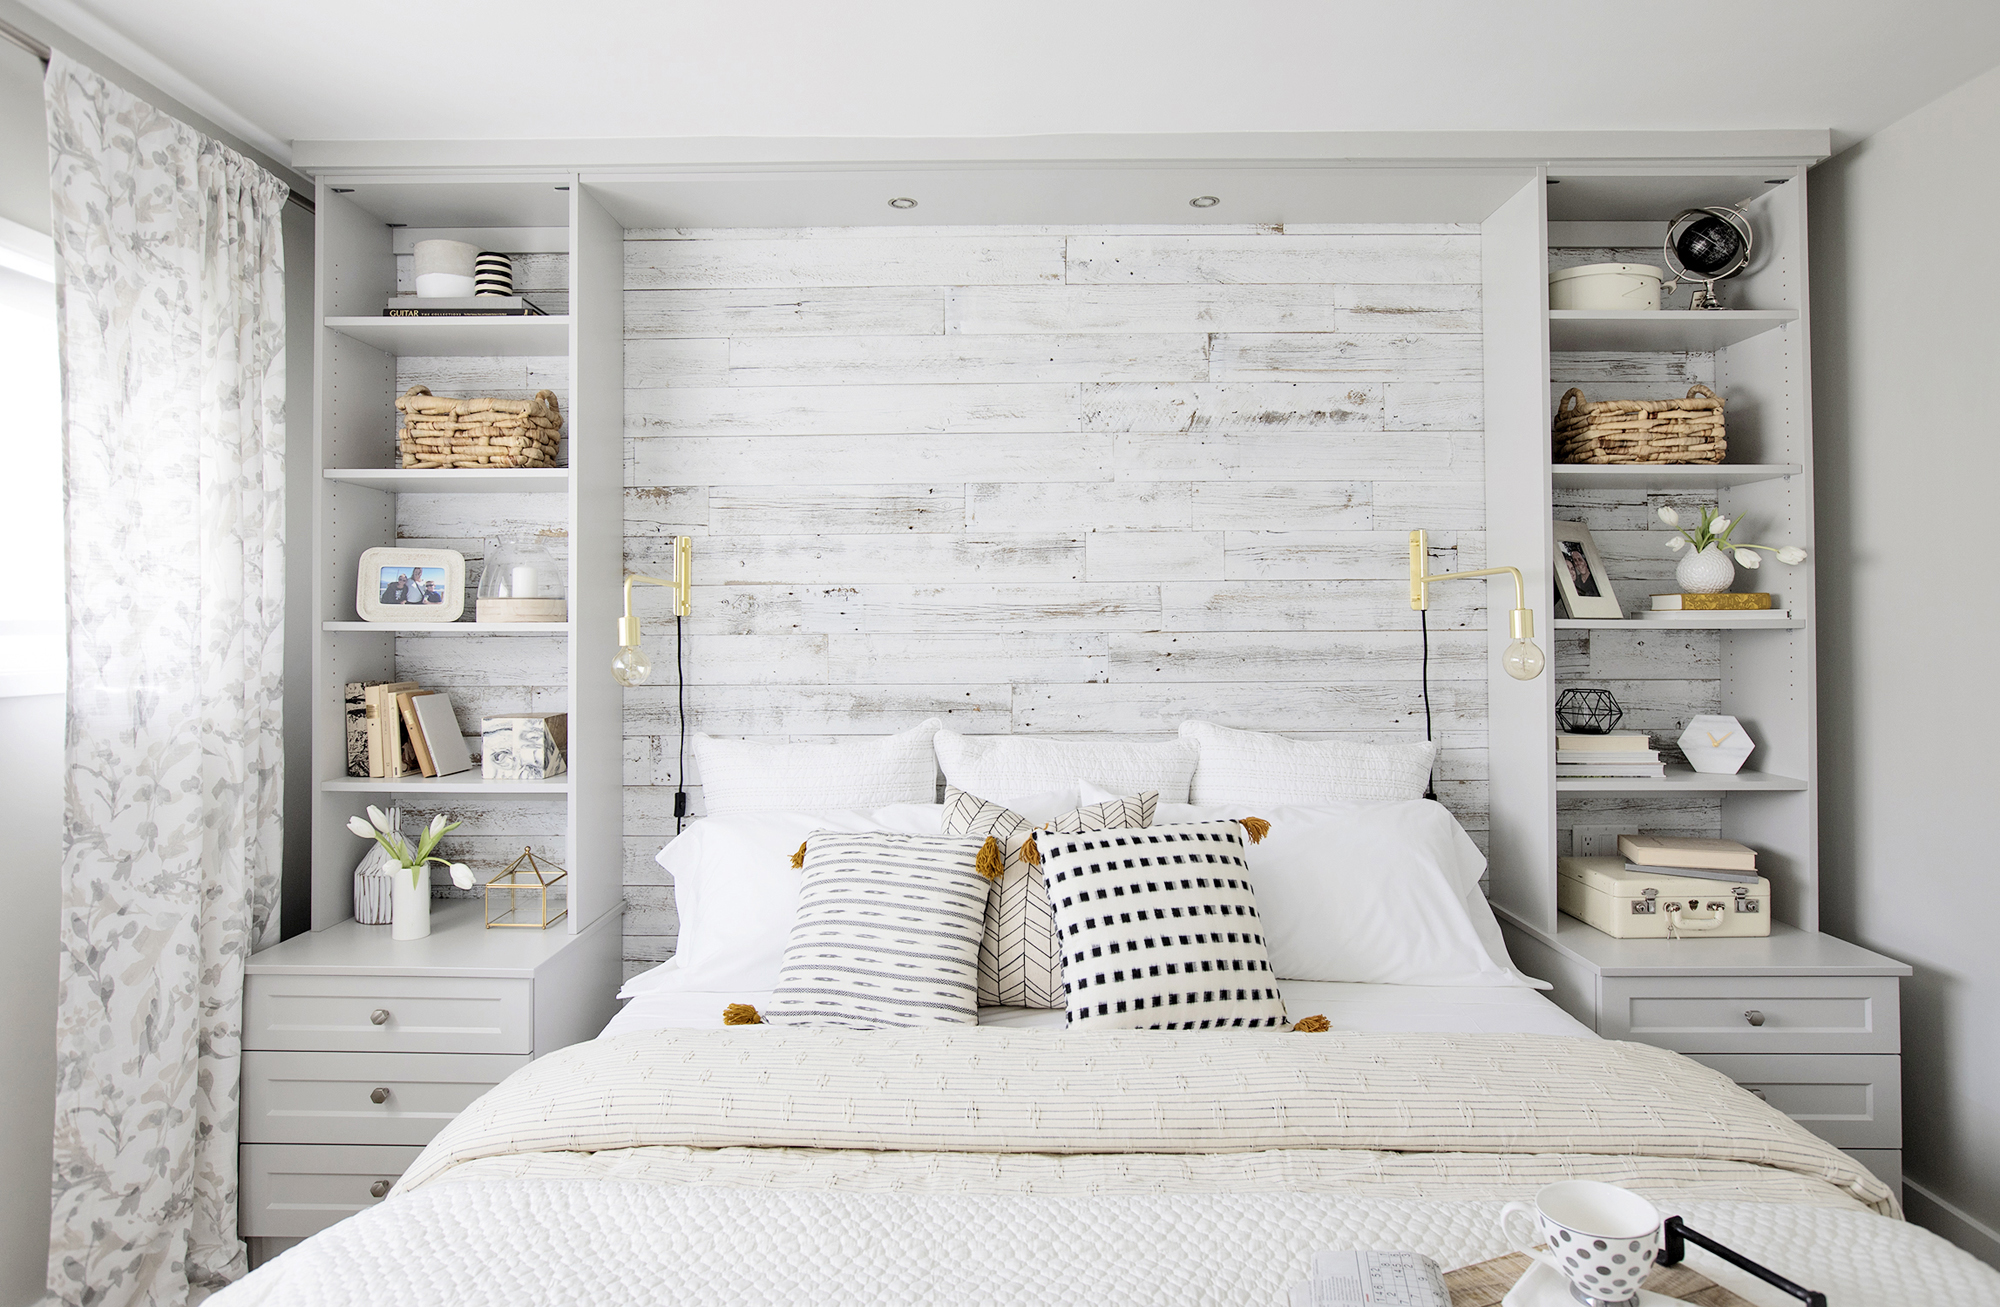 This Contemporary Redesign is Every Organizer's Dream